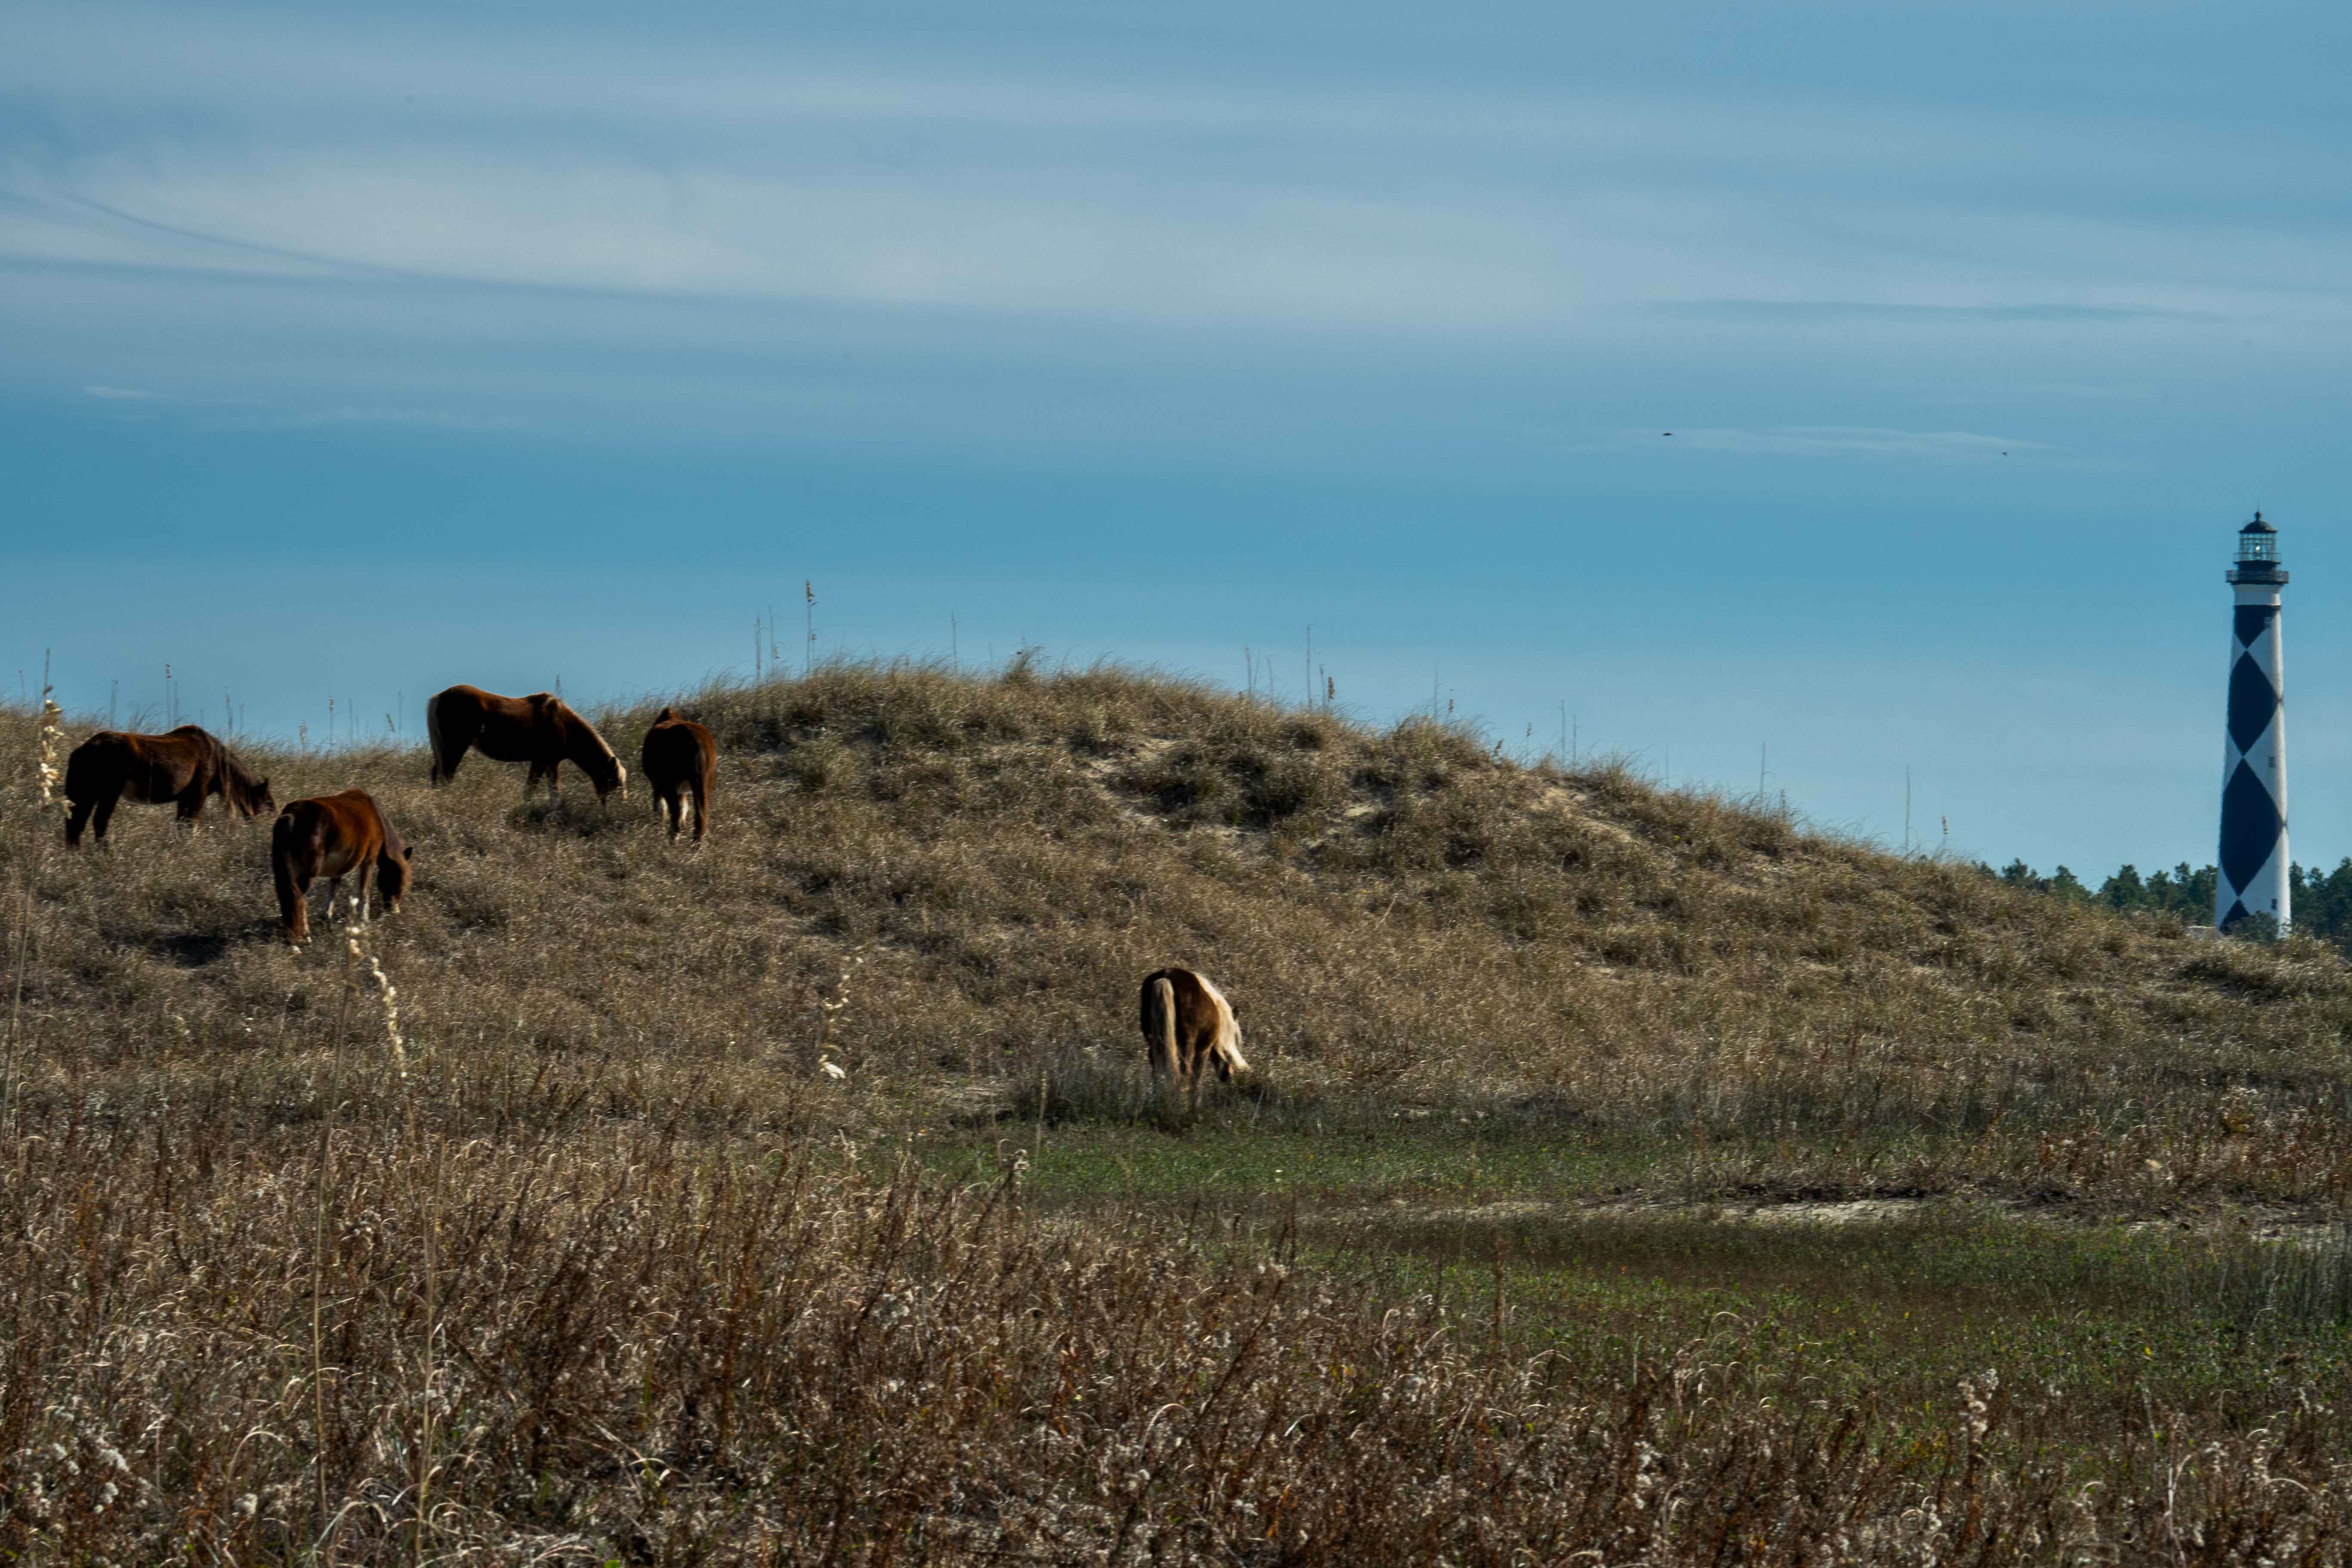 5 Shackleford Banks Horses graze on a grass covered dune, with the Cape Lookout Lighthouse in the background on the right.